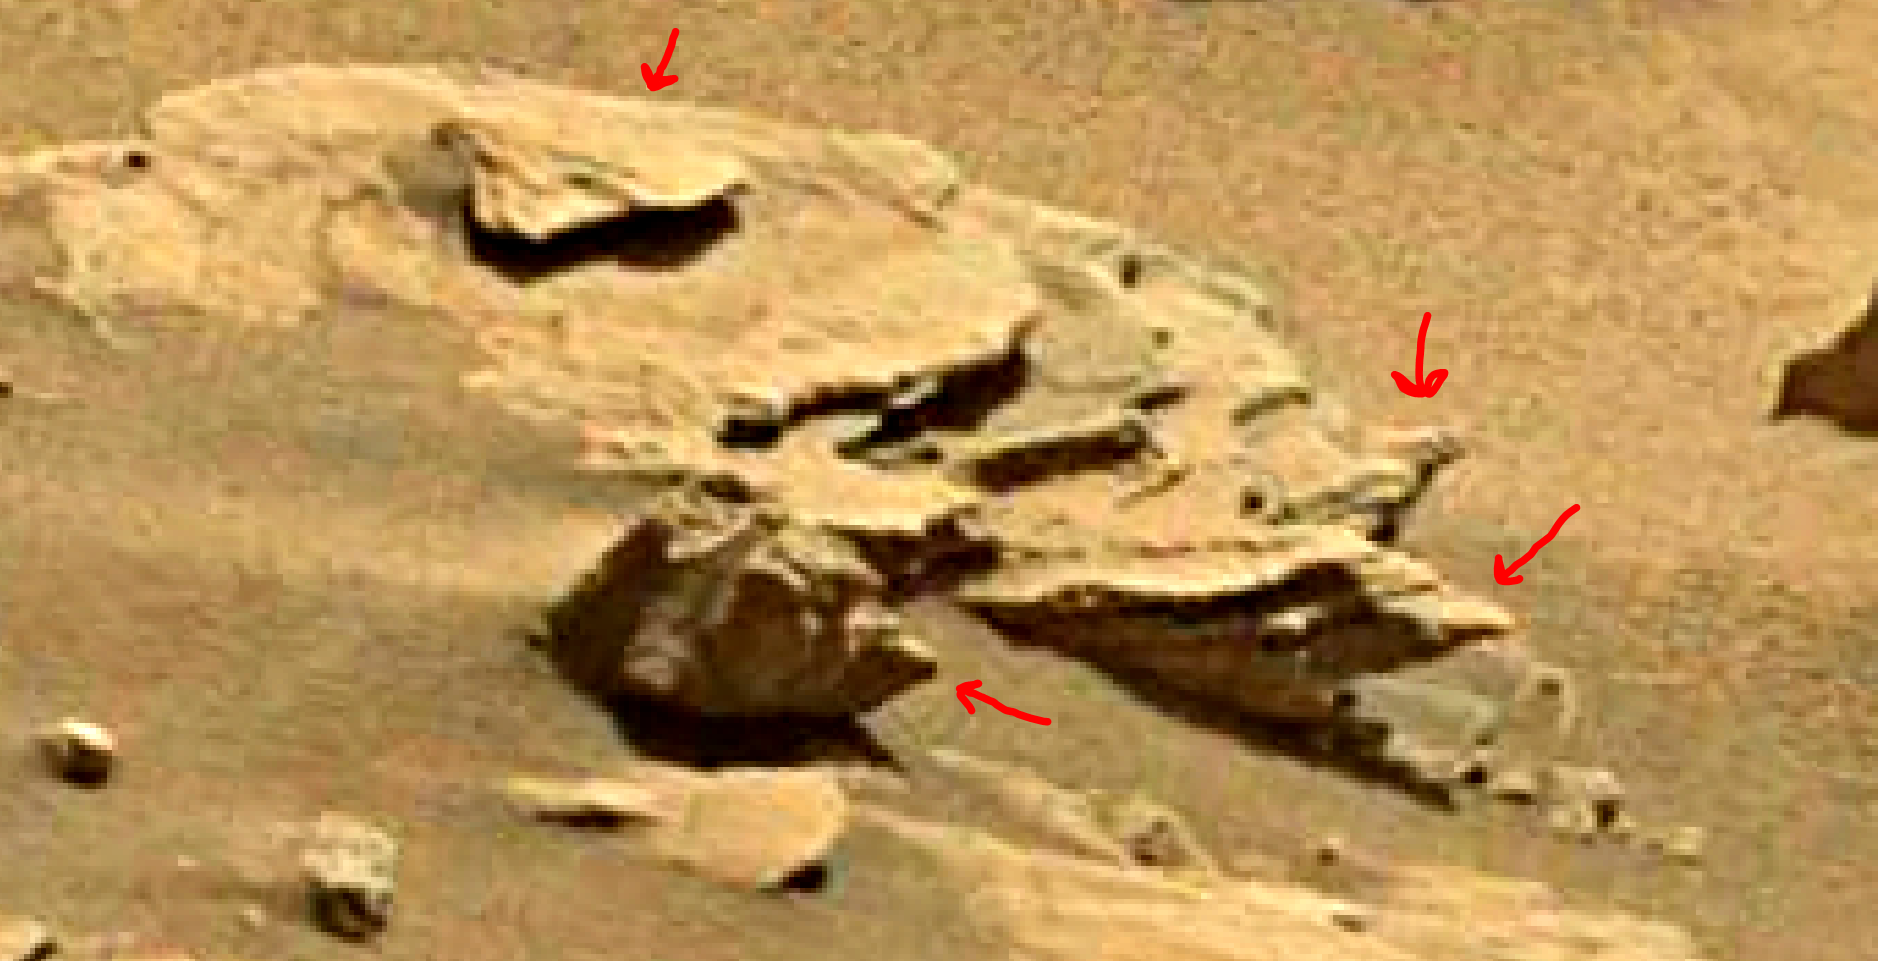 mars sol 1349 anomaly-artifacts 4a was life on mars